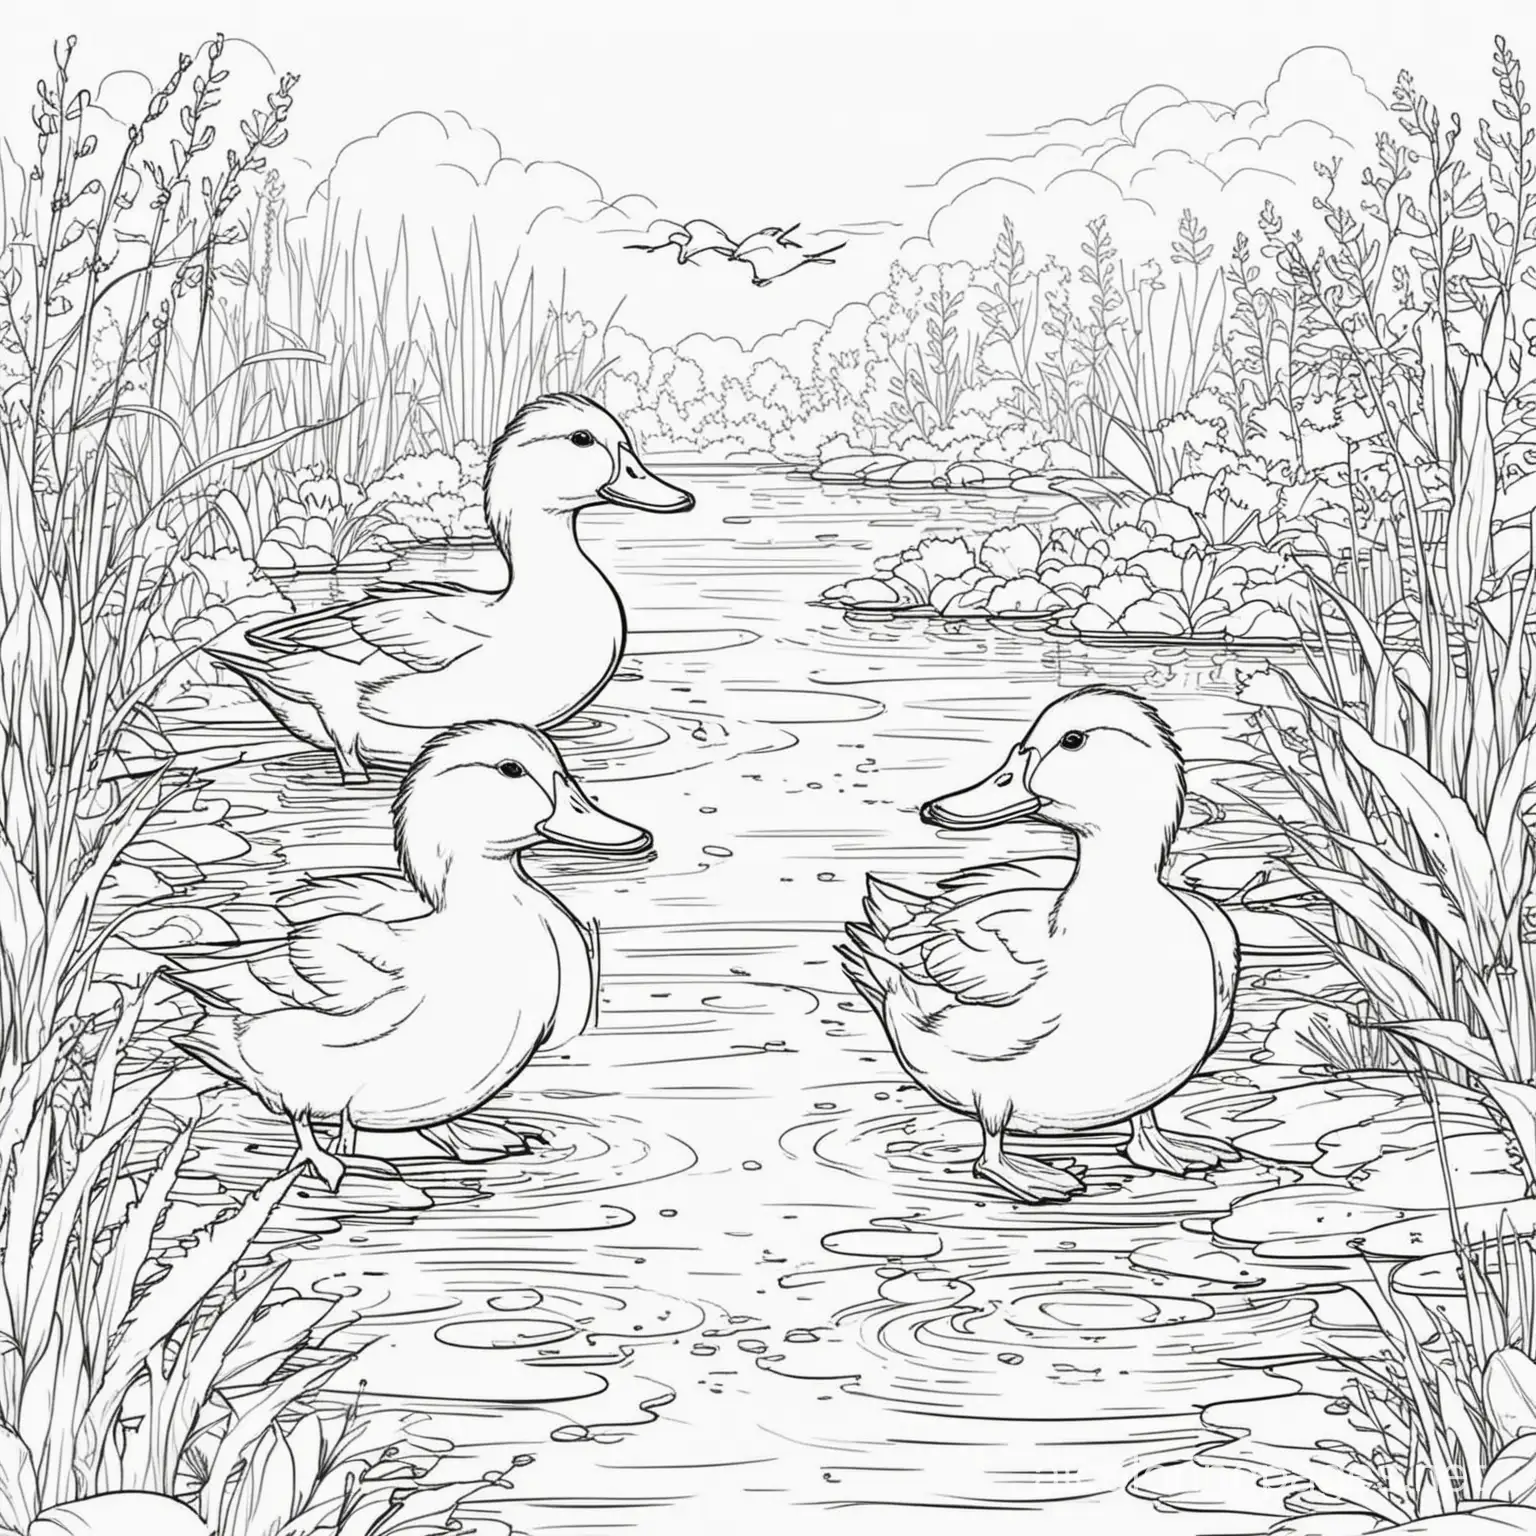 ducks 
on pond


, Coloring Page, black and white, line art, white background, Simplicity, Ample White Space. The background of the coloring page is plain white to make it easy for young children to color within the lines. The outlines of all the subjects are easy to distinguish, making it simple for kids to color without too much difficulty